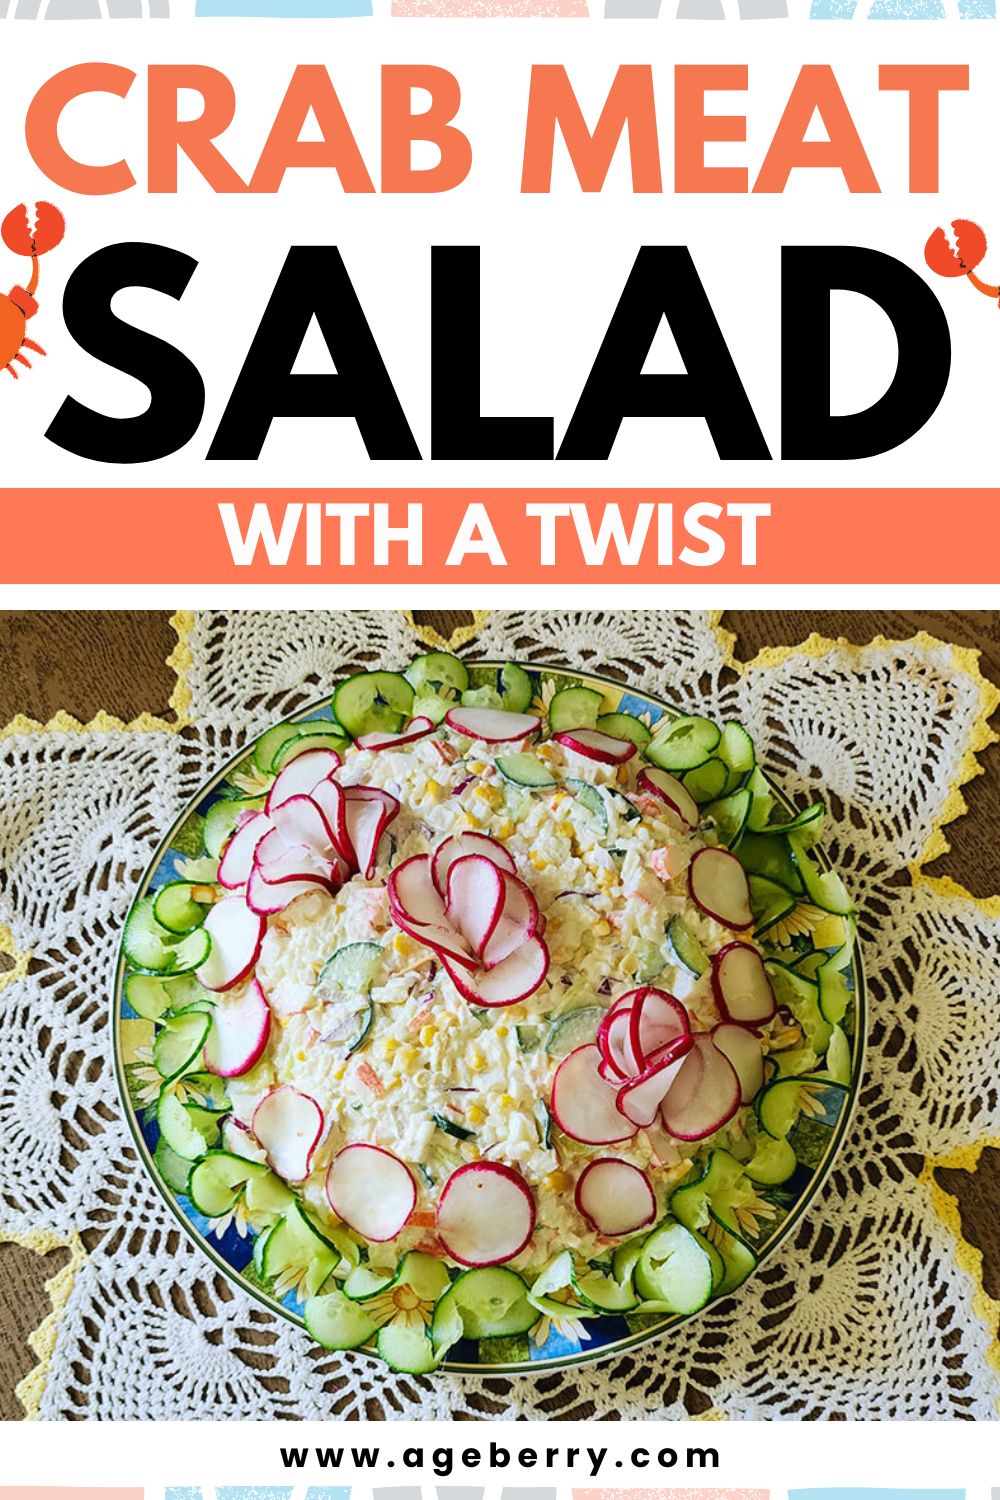 Best imitation crab meat salad recipe with a twist